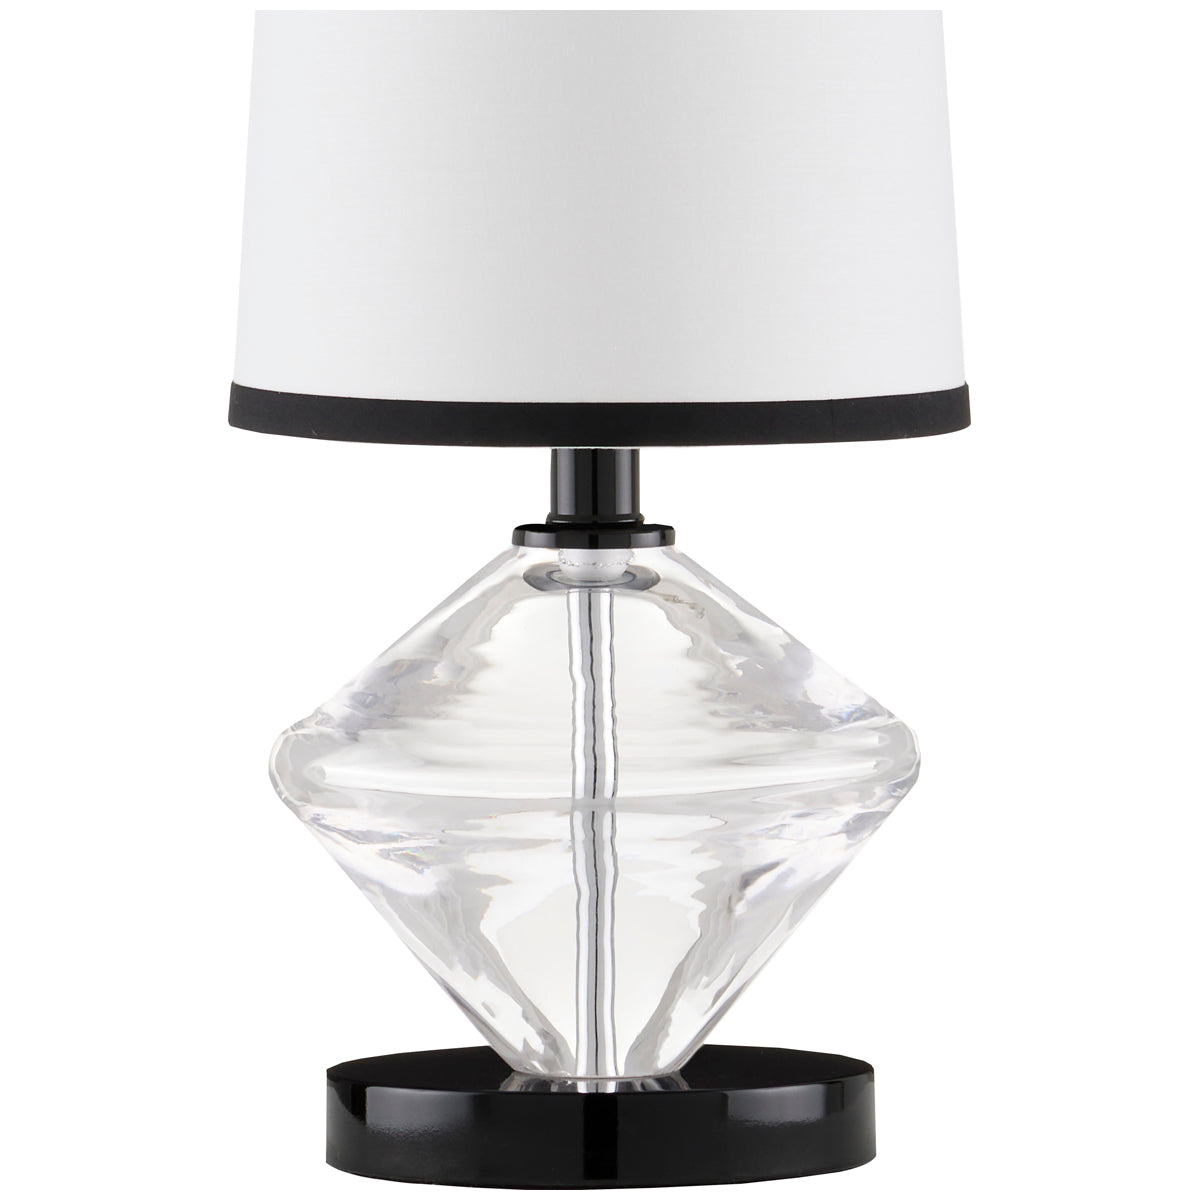 Currey and Company Whirling Dervish Table Lamp